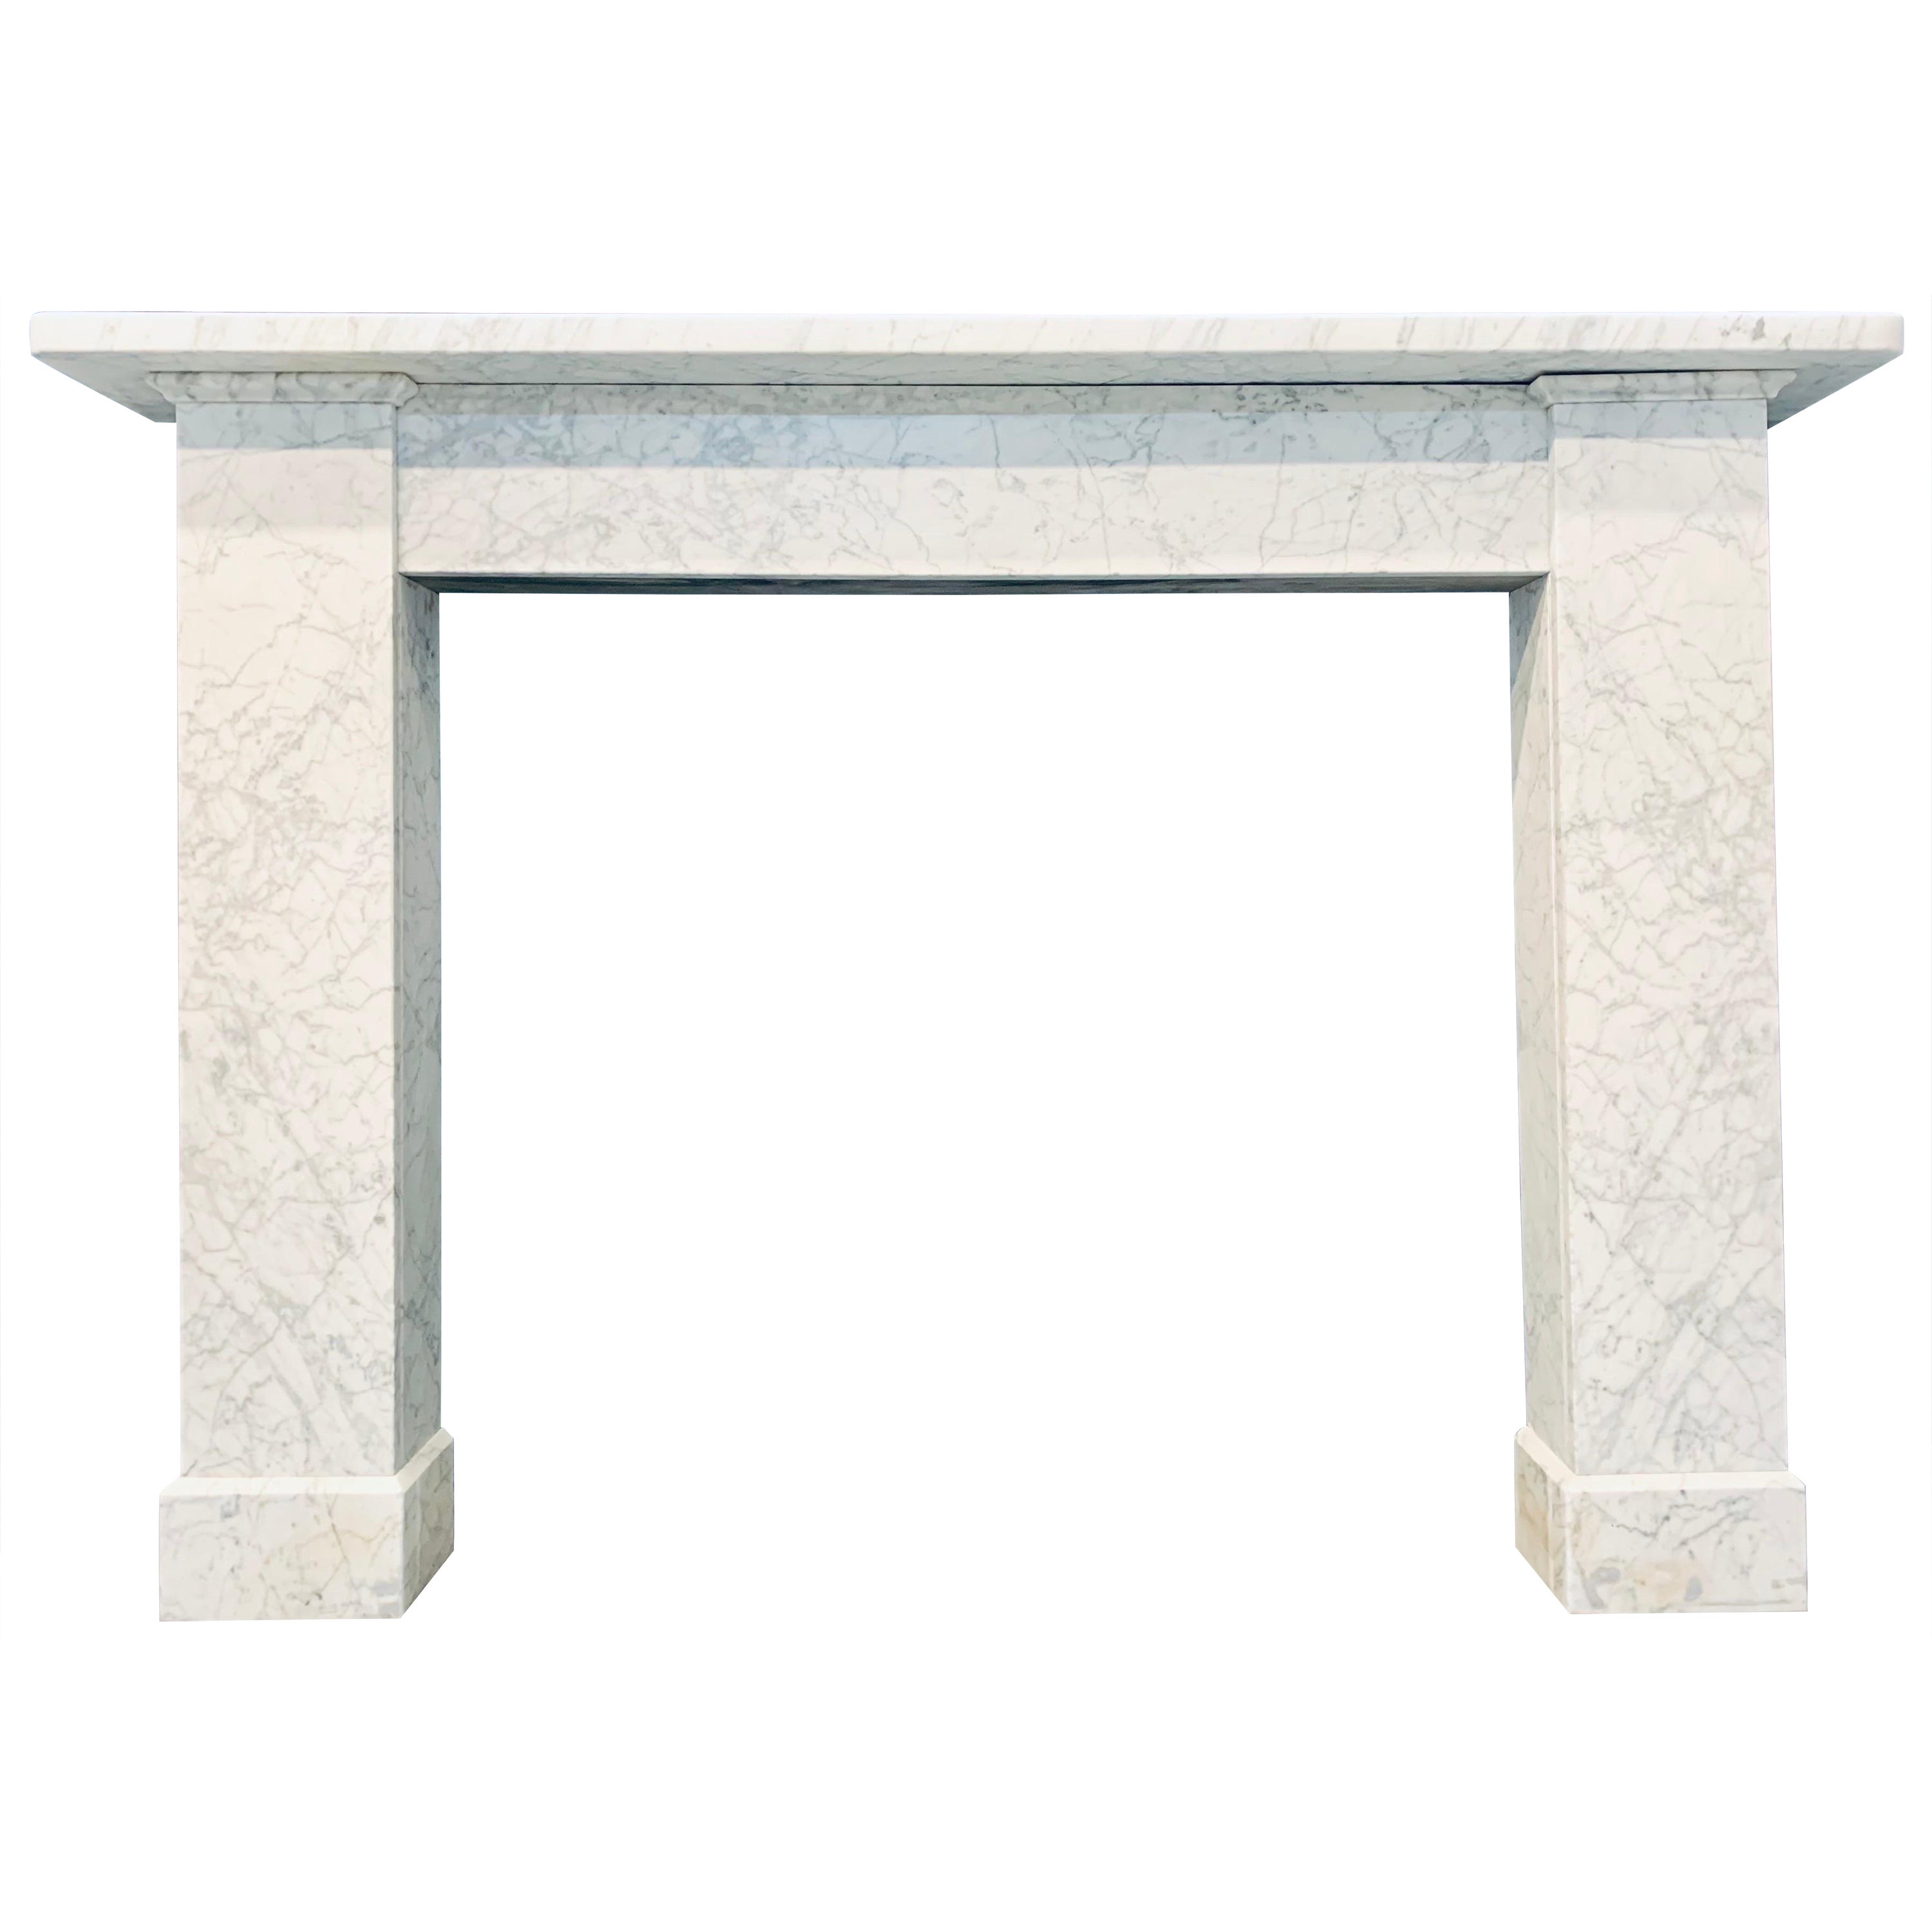 Scottish 19th C Early Victorian Pencil Veined Carrara Marble Fireplace Surround. im Angebot